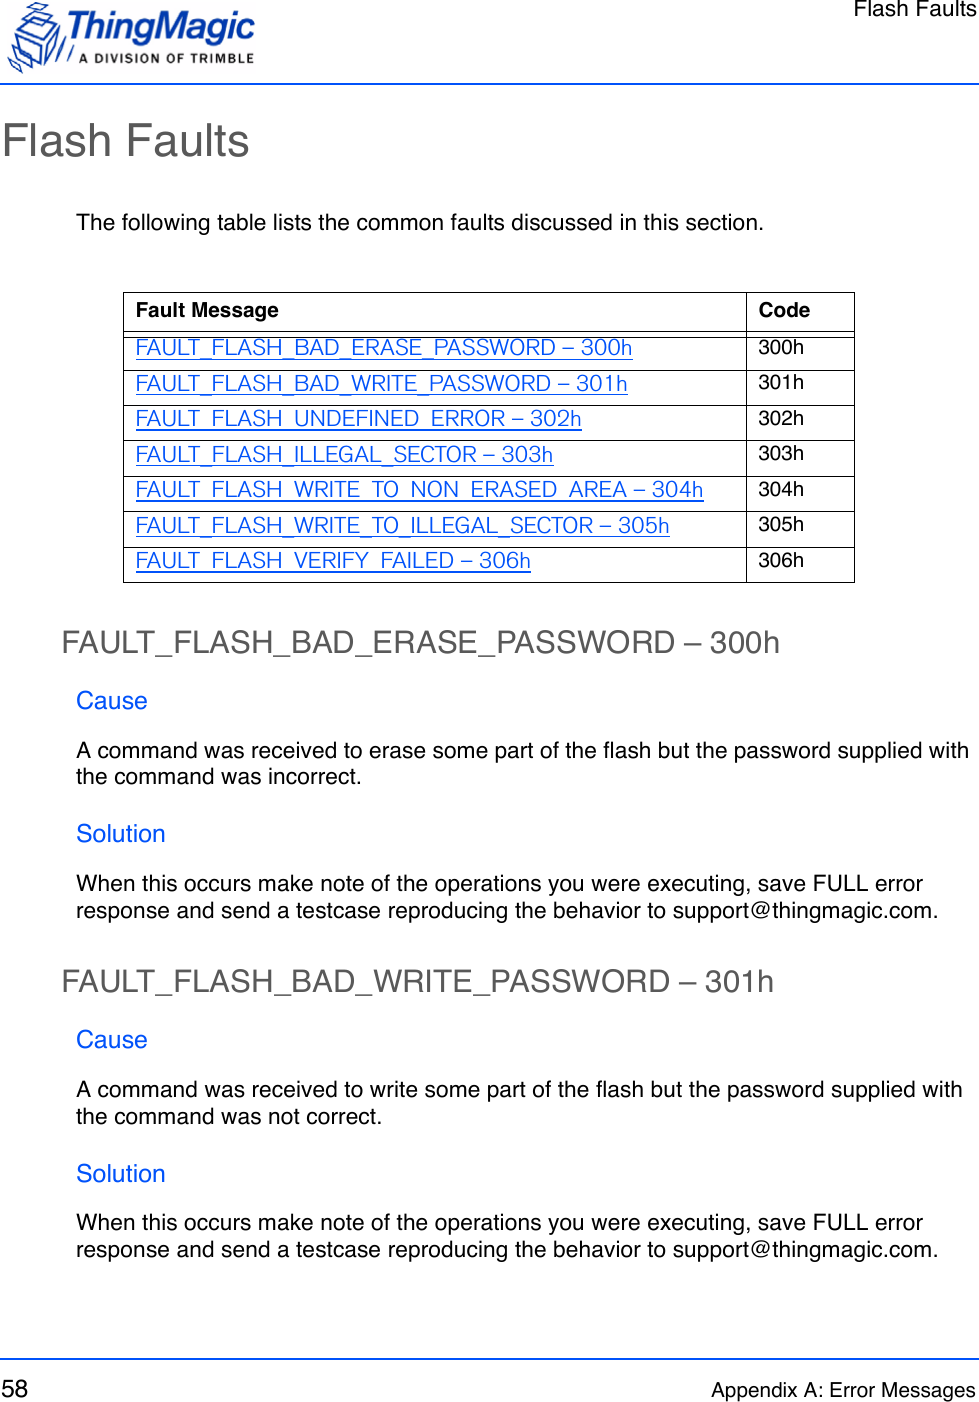 Flash Faults58 Appendix A: Error MessagesFlash FaultsThe following table lists the common faults discussed in this section.FAULT_FLASH_BAD_ERASE_PASSWORD – 300hCauseA command was received to erase some part of the flash but the password supplied with the command was incorrect.SolutionWhen this occurs make note of the operations you were executing, save FULL error response and send a testcase reproducing the behavior to support@thingmagic.com.FAULT_FLASH_BAD_WRITE_PASSWORD – 301hCauseA command was received to write some part of the flash but the password supplied with the command was not correct.SolutionWhen this occurs make note of the operations you were executing, save FULL error response and send a testcase reproducing the behavior to support@thingmagic.com.Fault Message CodeFAULT_FLASH_BAD_ERASE_PASSWORD – 300h 300hFAULT_FLASH_BAD_WRITE_PASSWORD – 301h 301hFAULT_FLASH_UNDEFINED_ERROR – 302h 302hFAULT_FLASH_ILLEGAL_SECTOR – 303h 303hFAULT_FLASH_WRITE_TO_NON_ERASED_AREA – 304h 304hFAULT_FLASH_WRITE_TO_ILLEGAL_SECTOR – 305h 305hFAULT_FLASH_VERIFY_FAILED – 306h 306h